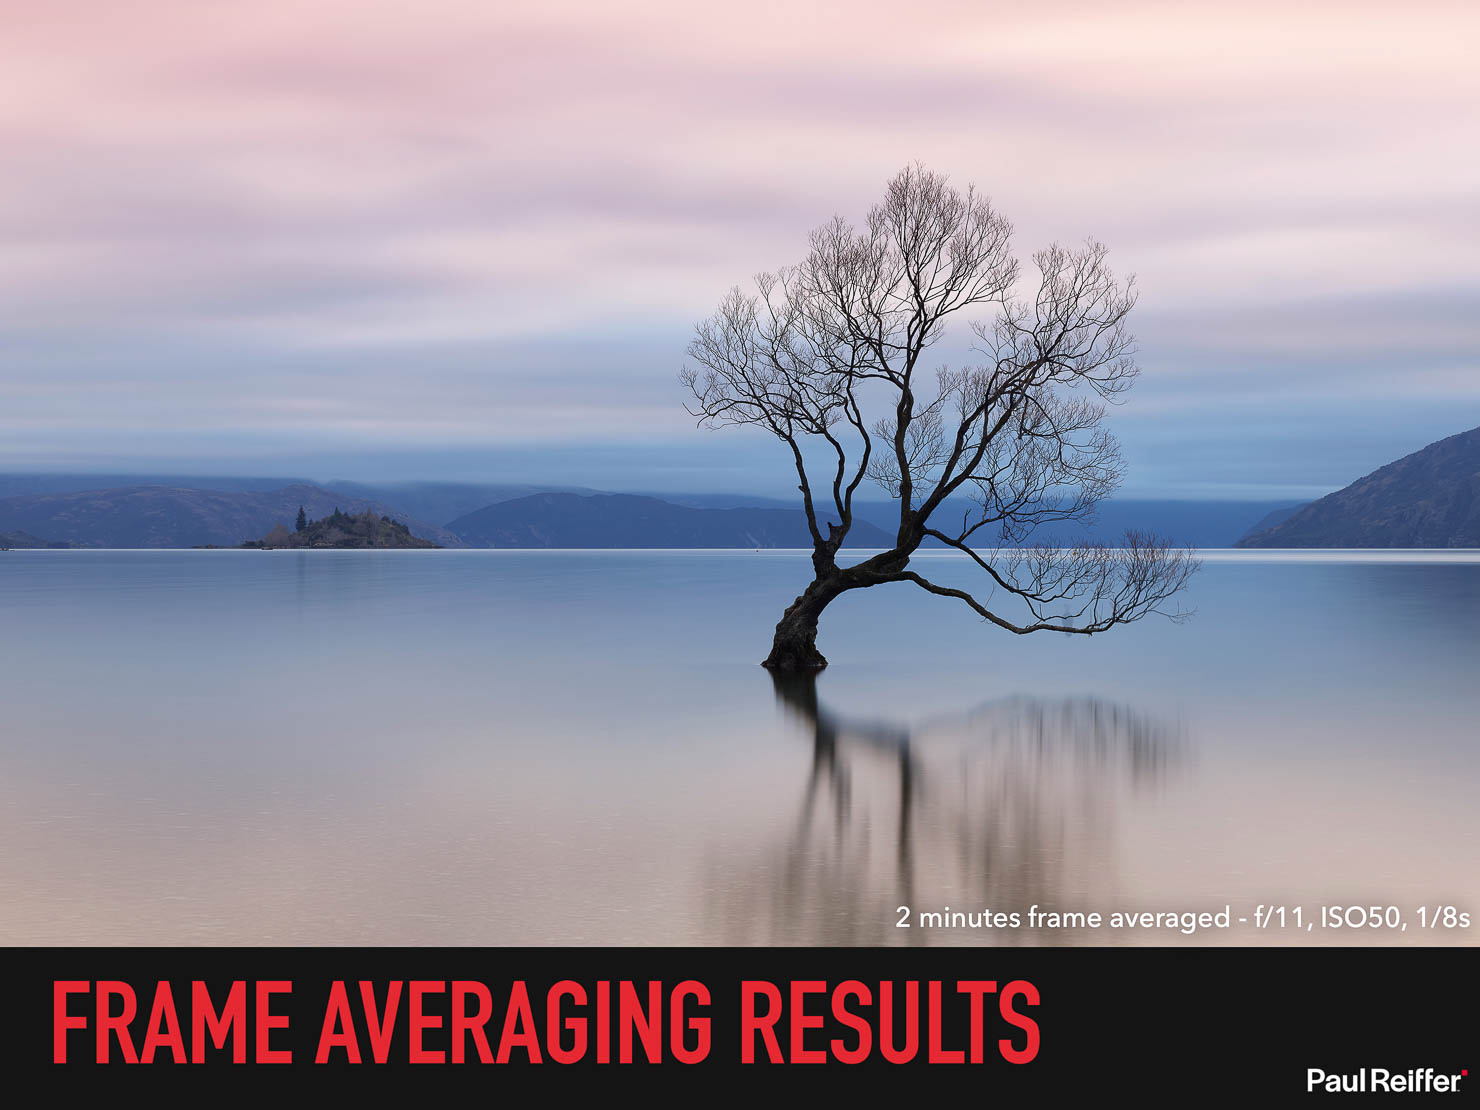 Frame Averaging Complete Guide Paul Reiffer Phase One Presentation Automated Long Exposure Afa How To 040 2 Minute That Wanaka Tree